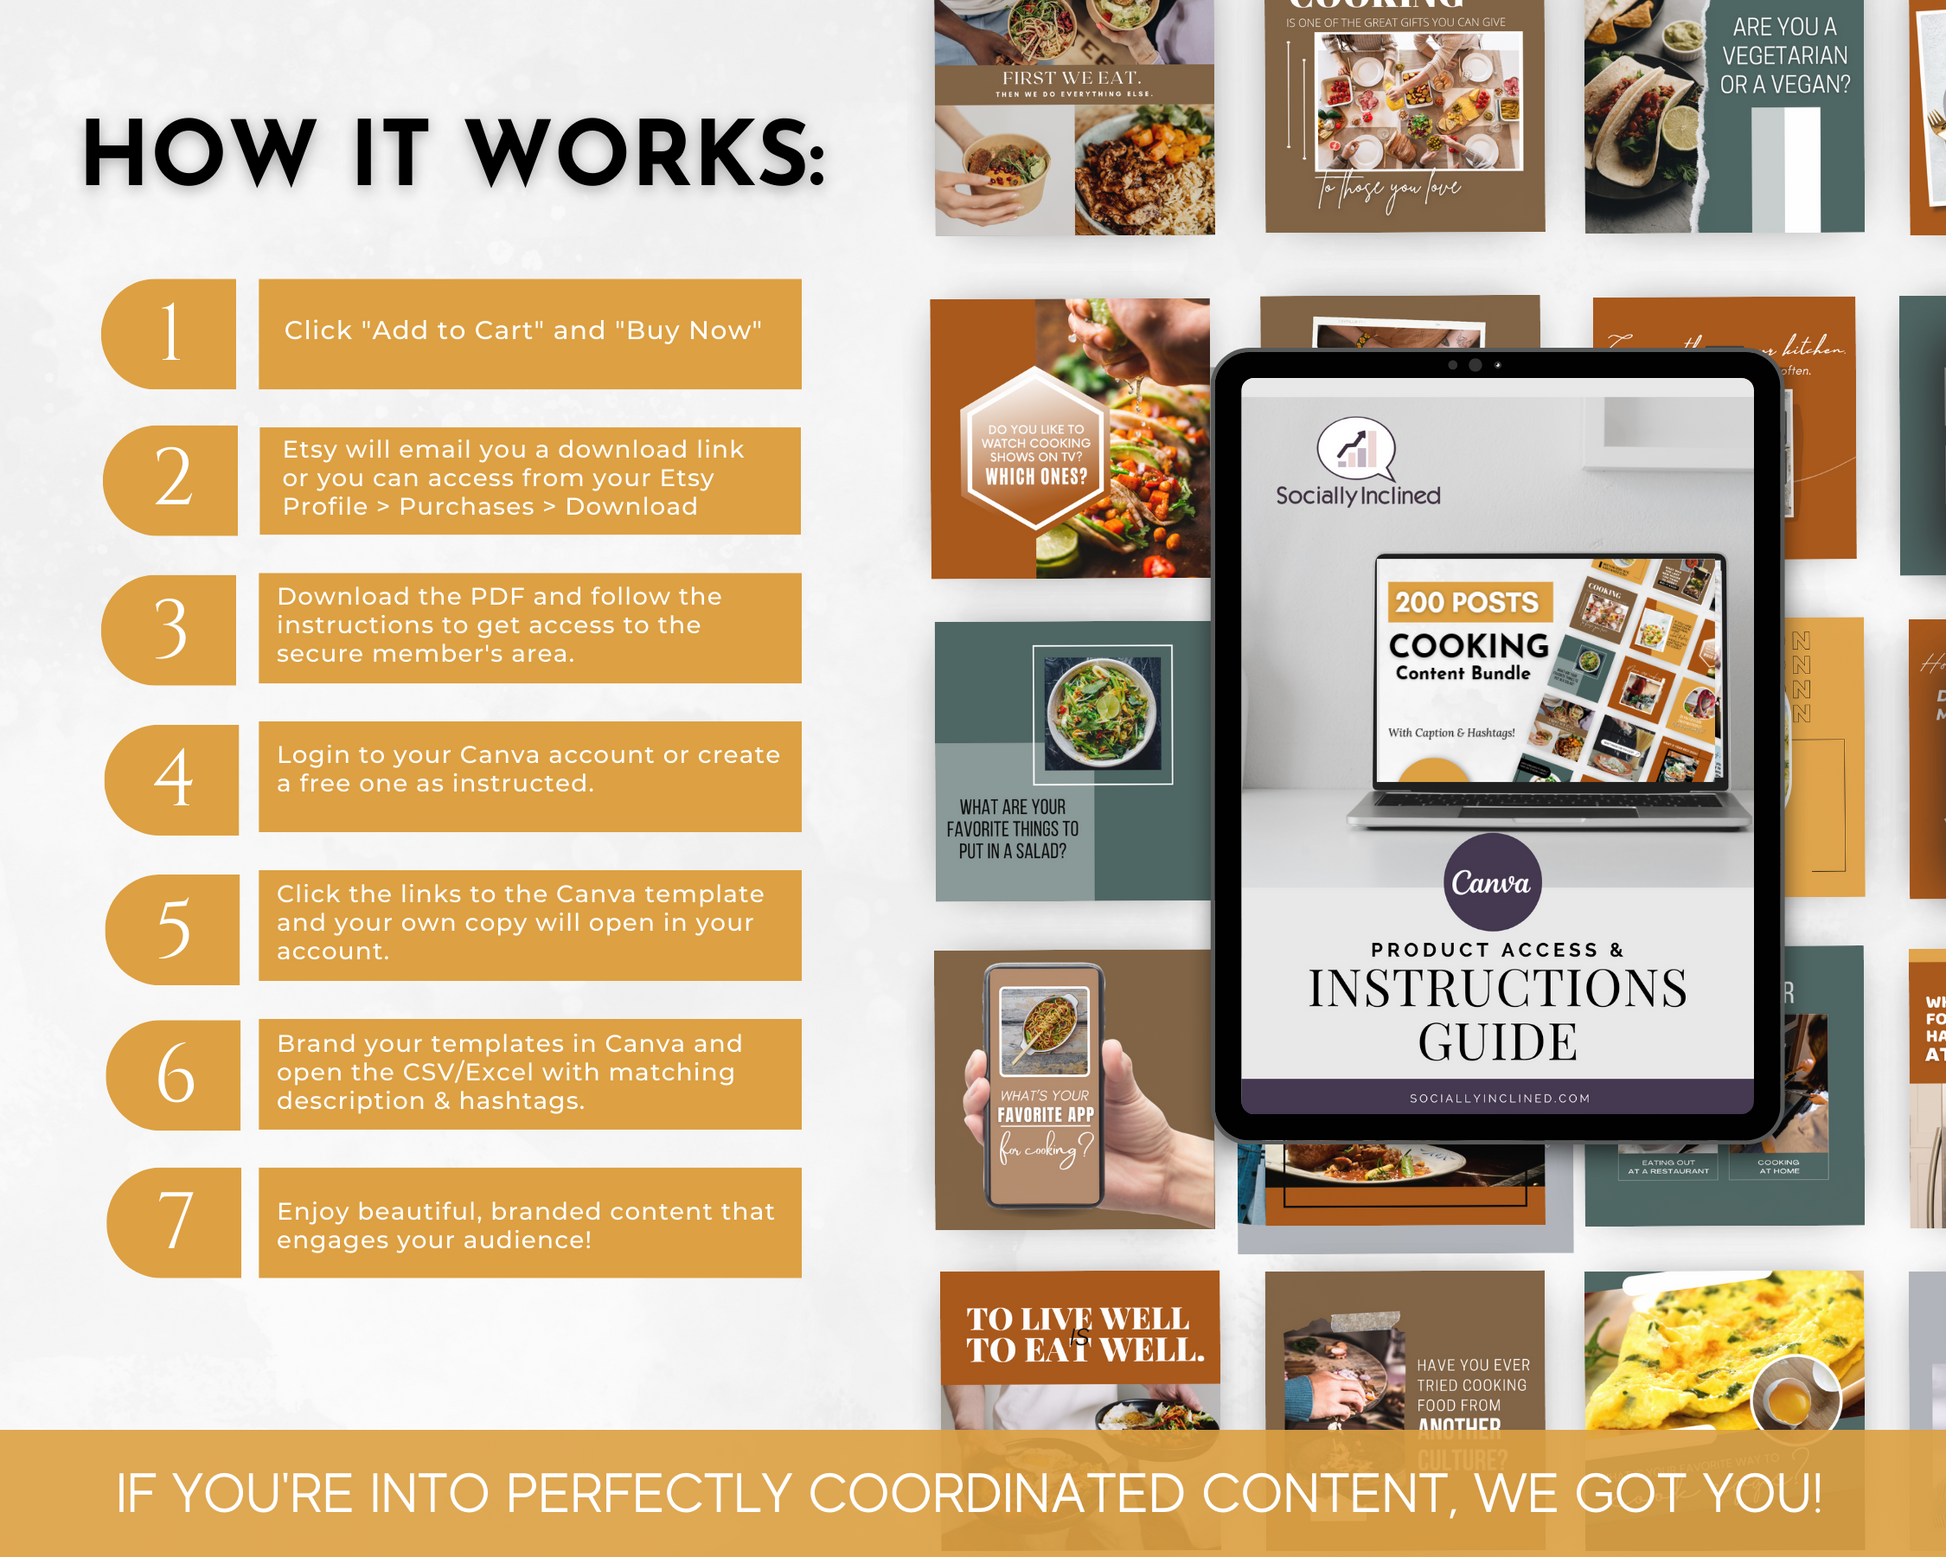 How the Cooking Social Media Post Bundle with Canva Templates from Socially Inclined works for social media images.